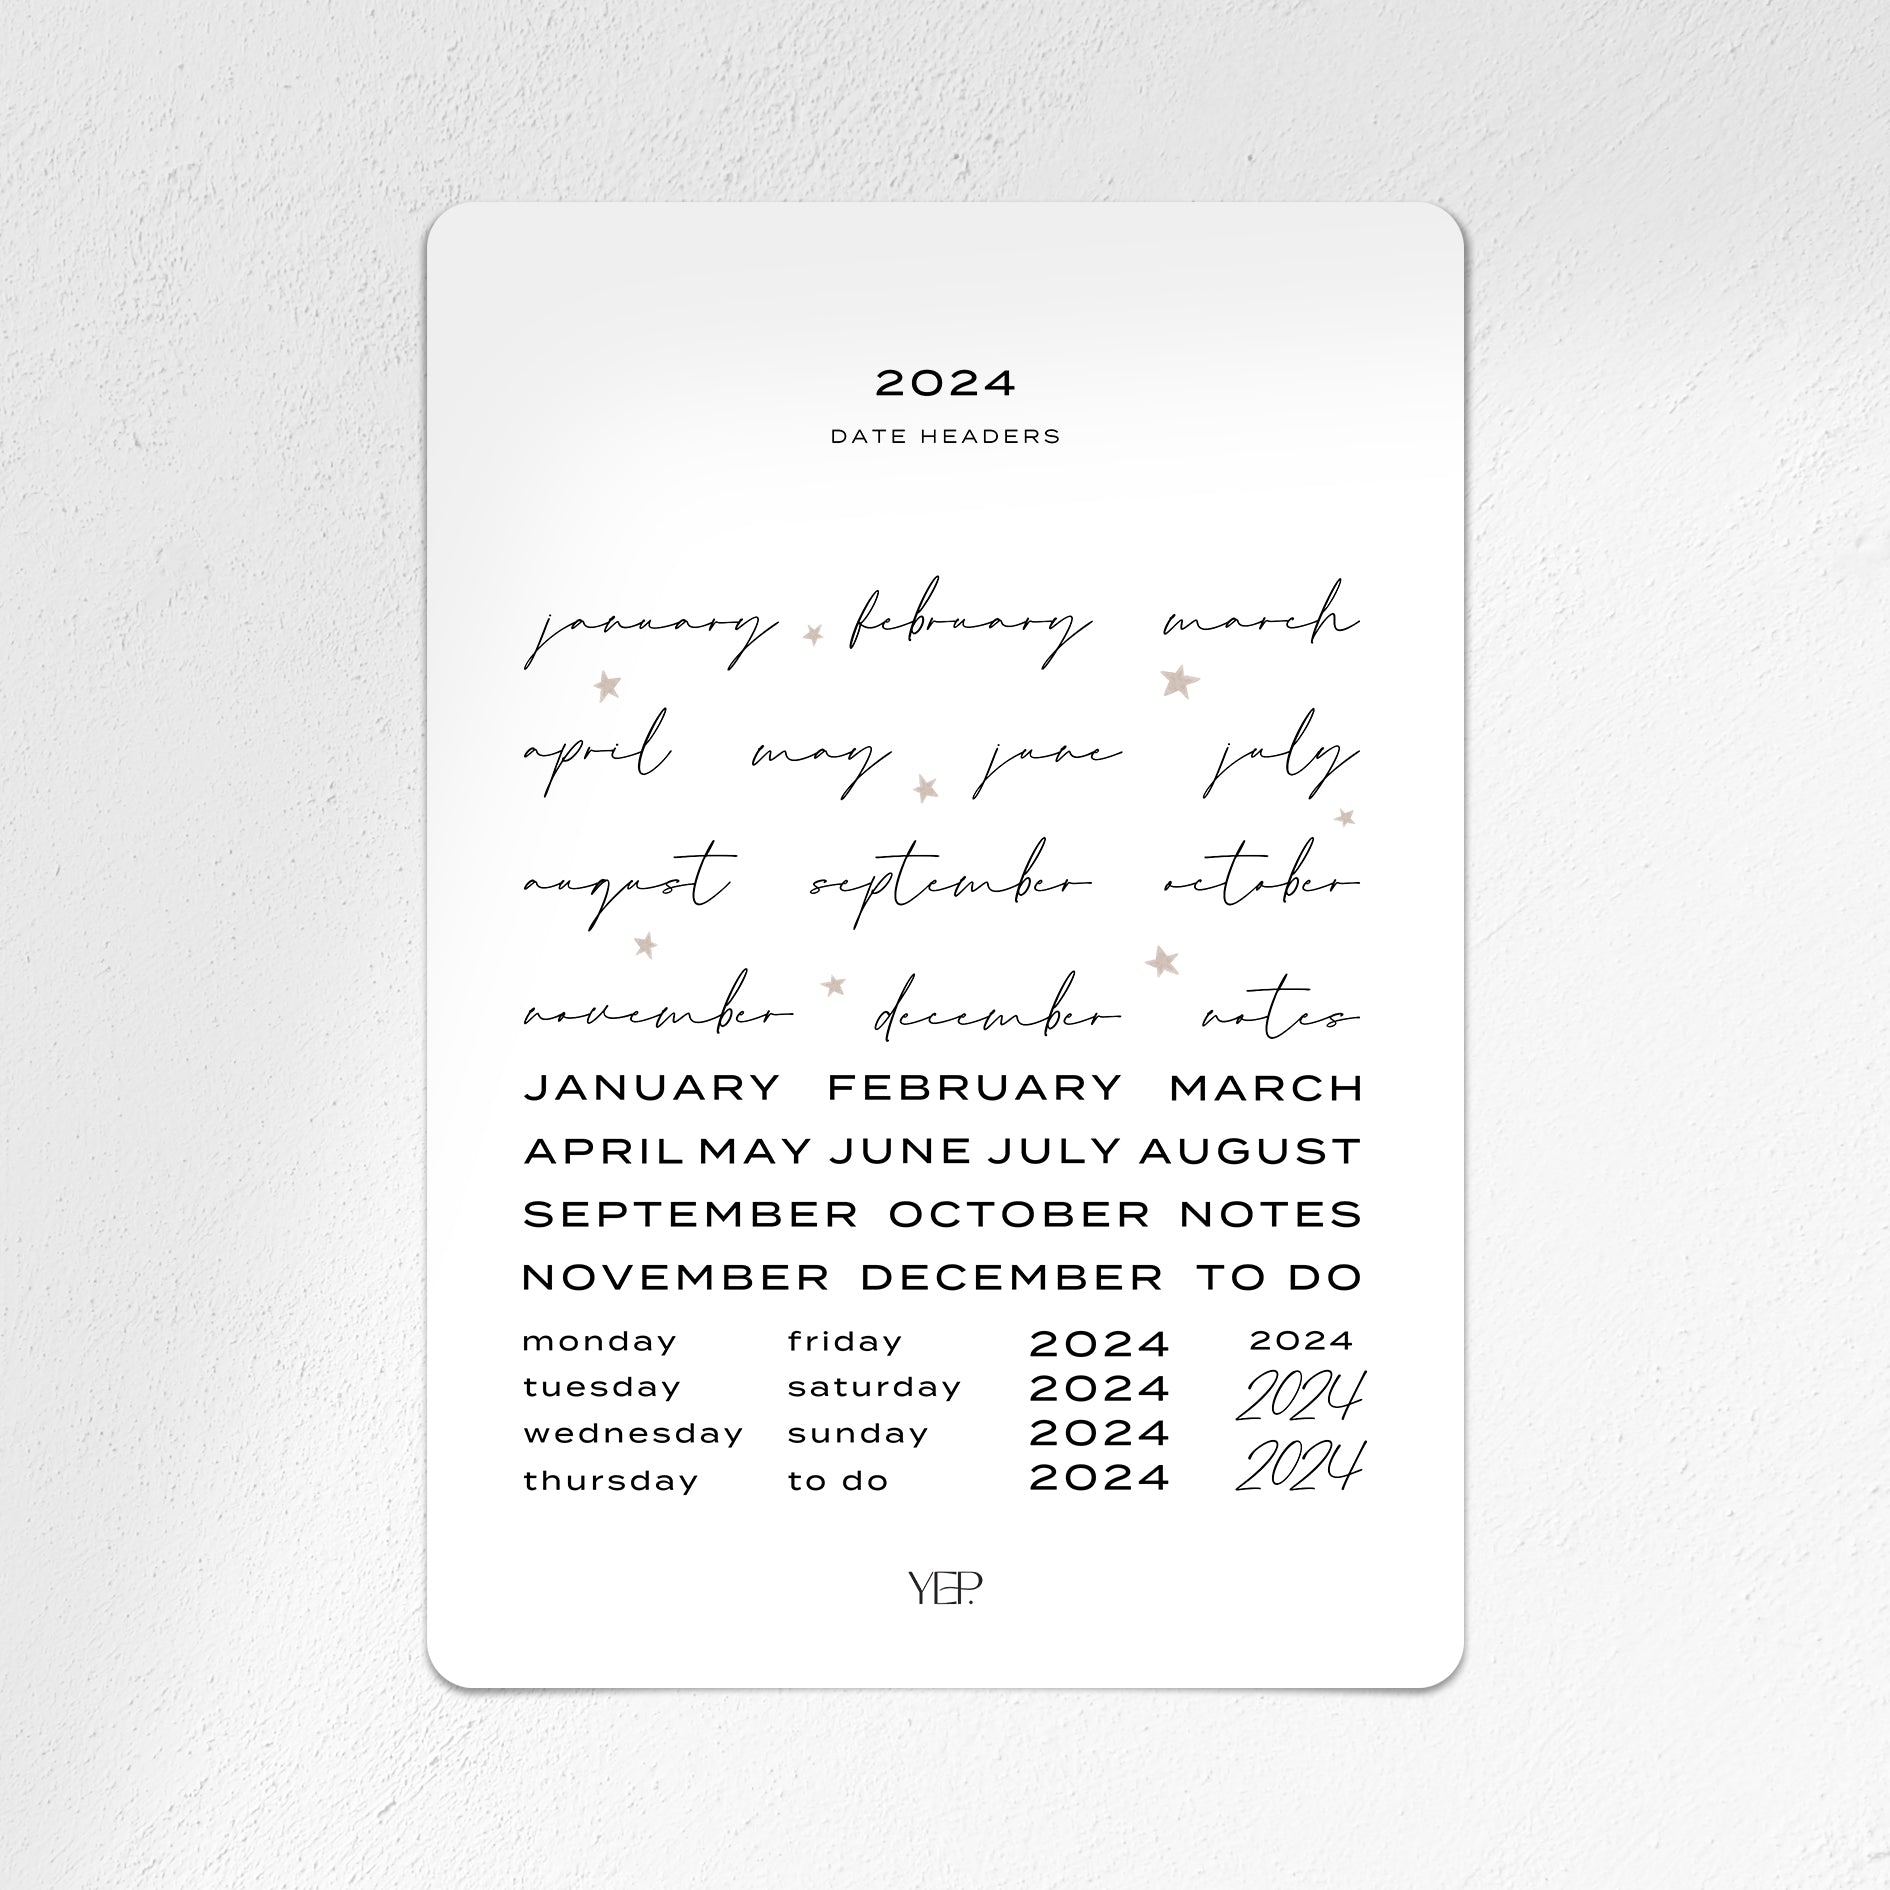 2024 Date Headers Your Everyday Planner